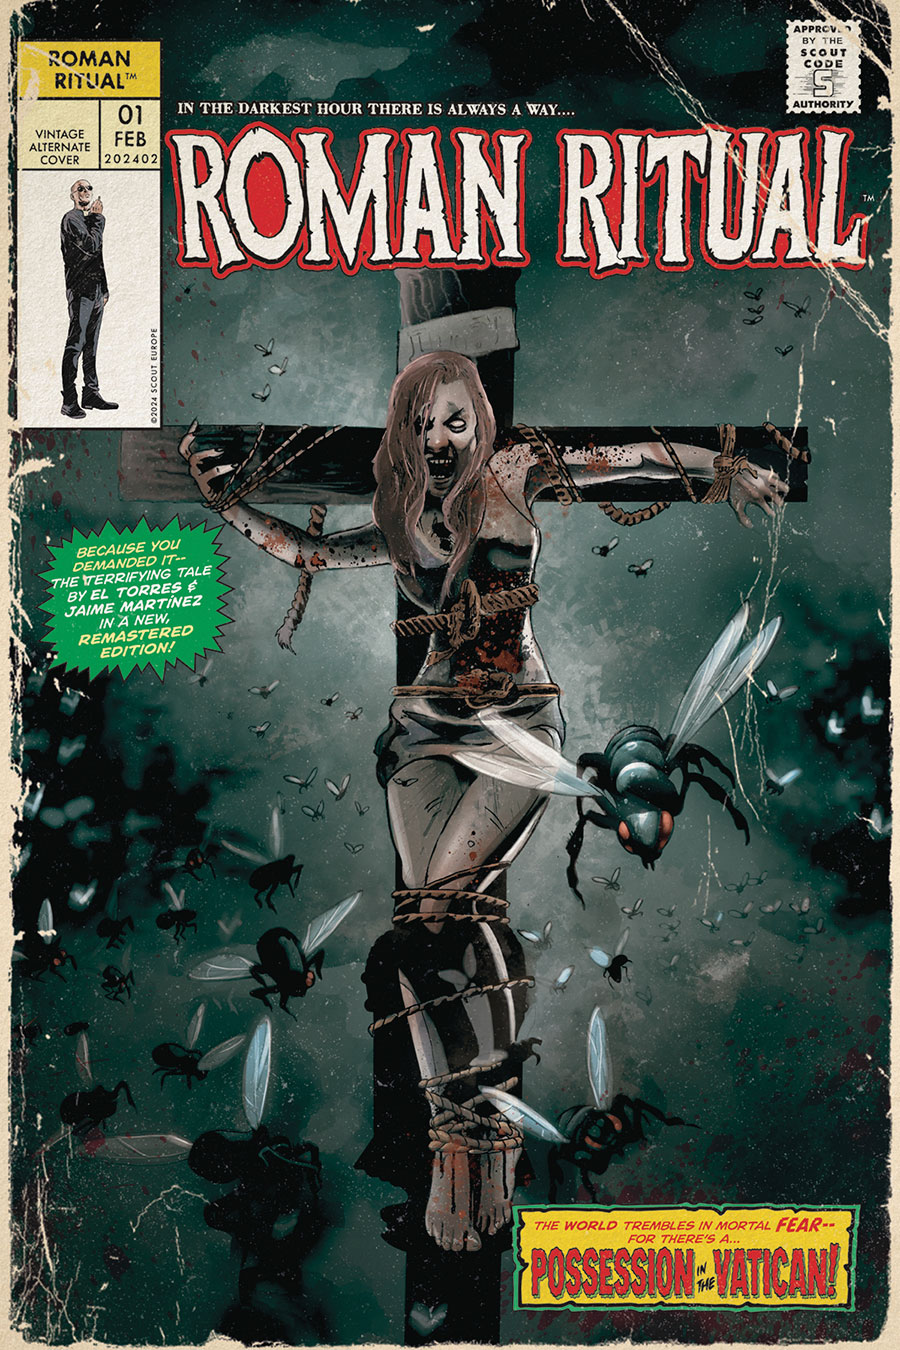 Roman Ritual Vol 3 #1 Cover C Variant Jaime Martinez Cover - RESOLICITED